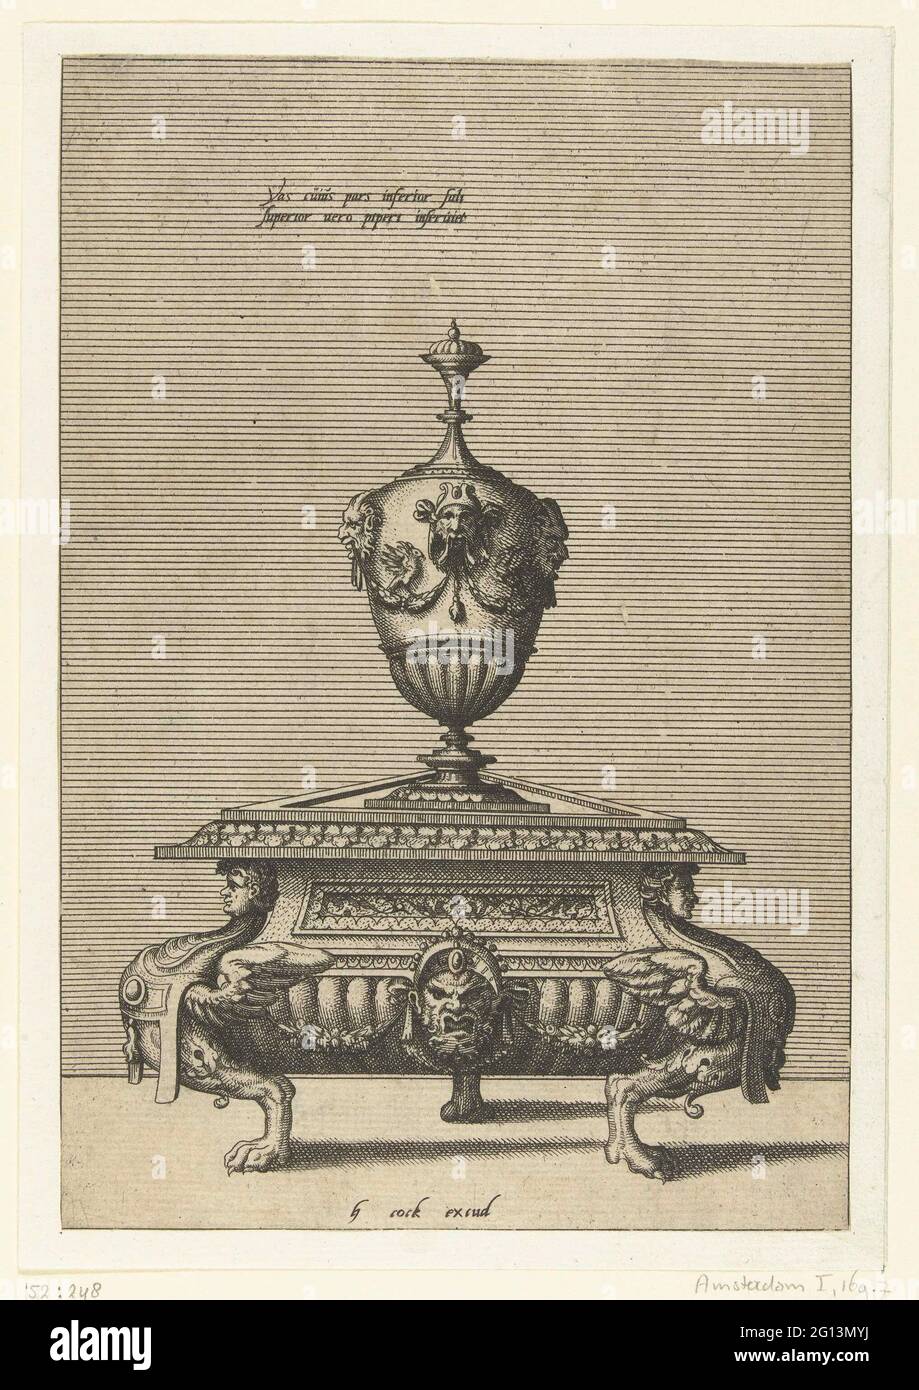 Pepper and salt barrel; Vas Cuius Pars Inferior Sali / Superior Vero Piperi Inseruite; Crockery such as jugs, pepper and salt vessels and a drinking scale. The triangular salt barrel is worn by sphinxes. The portion for pepper thereon has the shape of a vase. Horizontal shaded background. From series of 12 sheets. Stock Photo